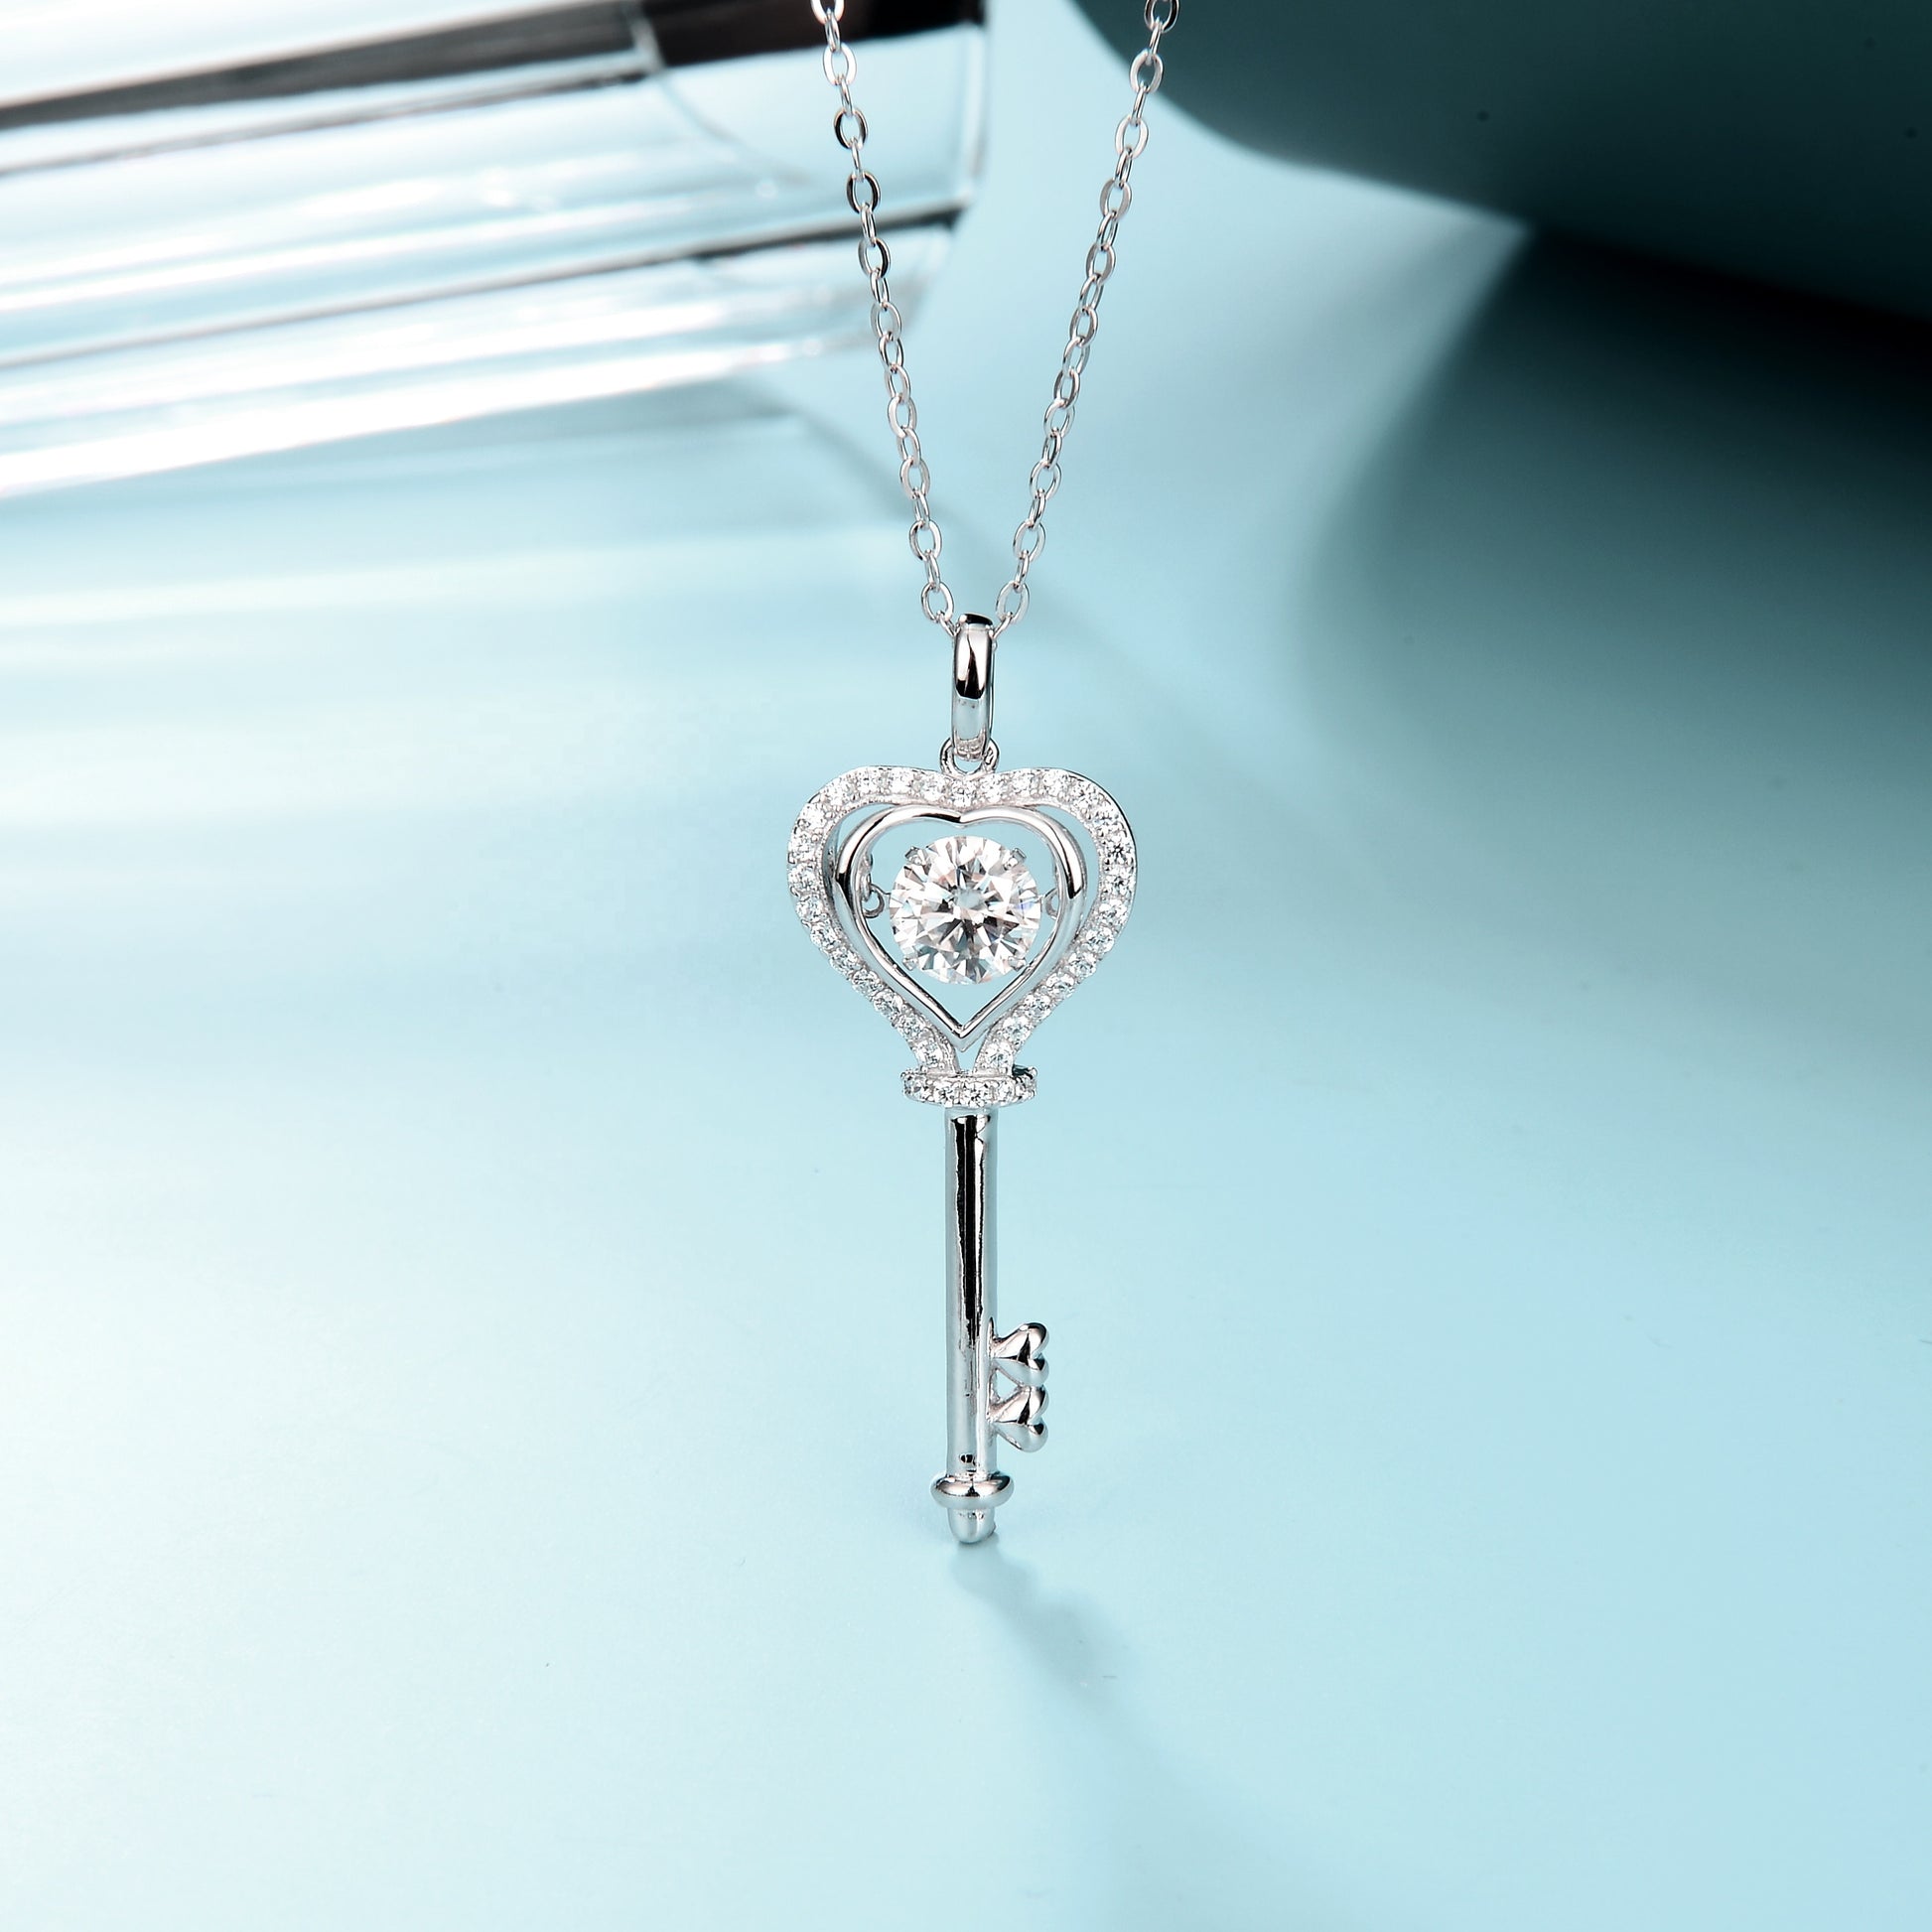 Key And Stone Pendant With A Moissanite Diamond front view